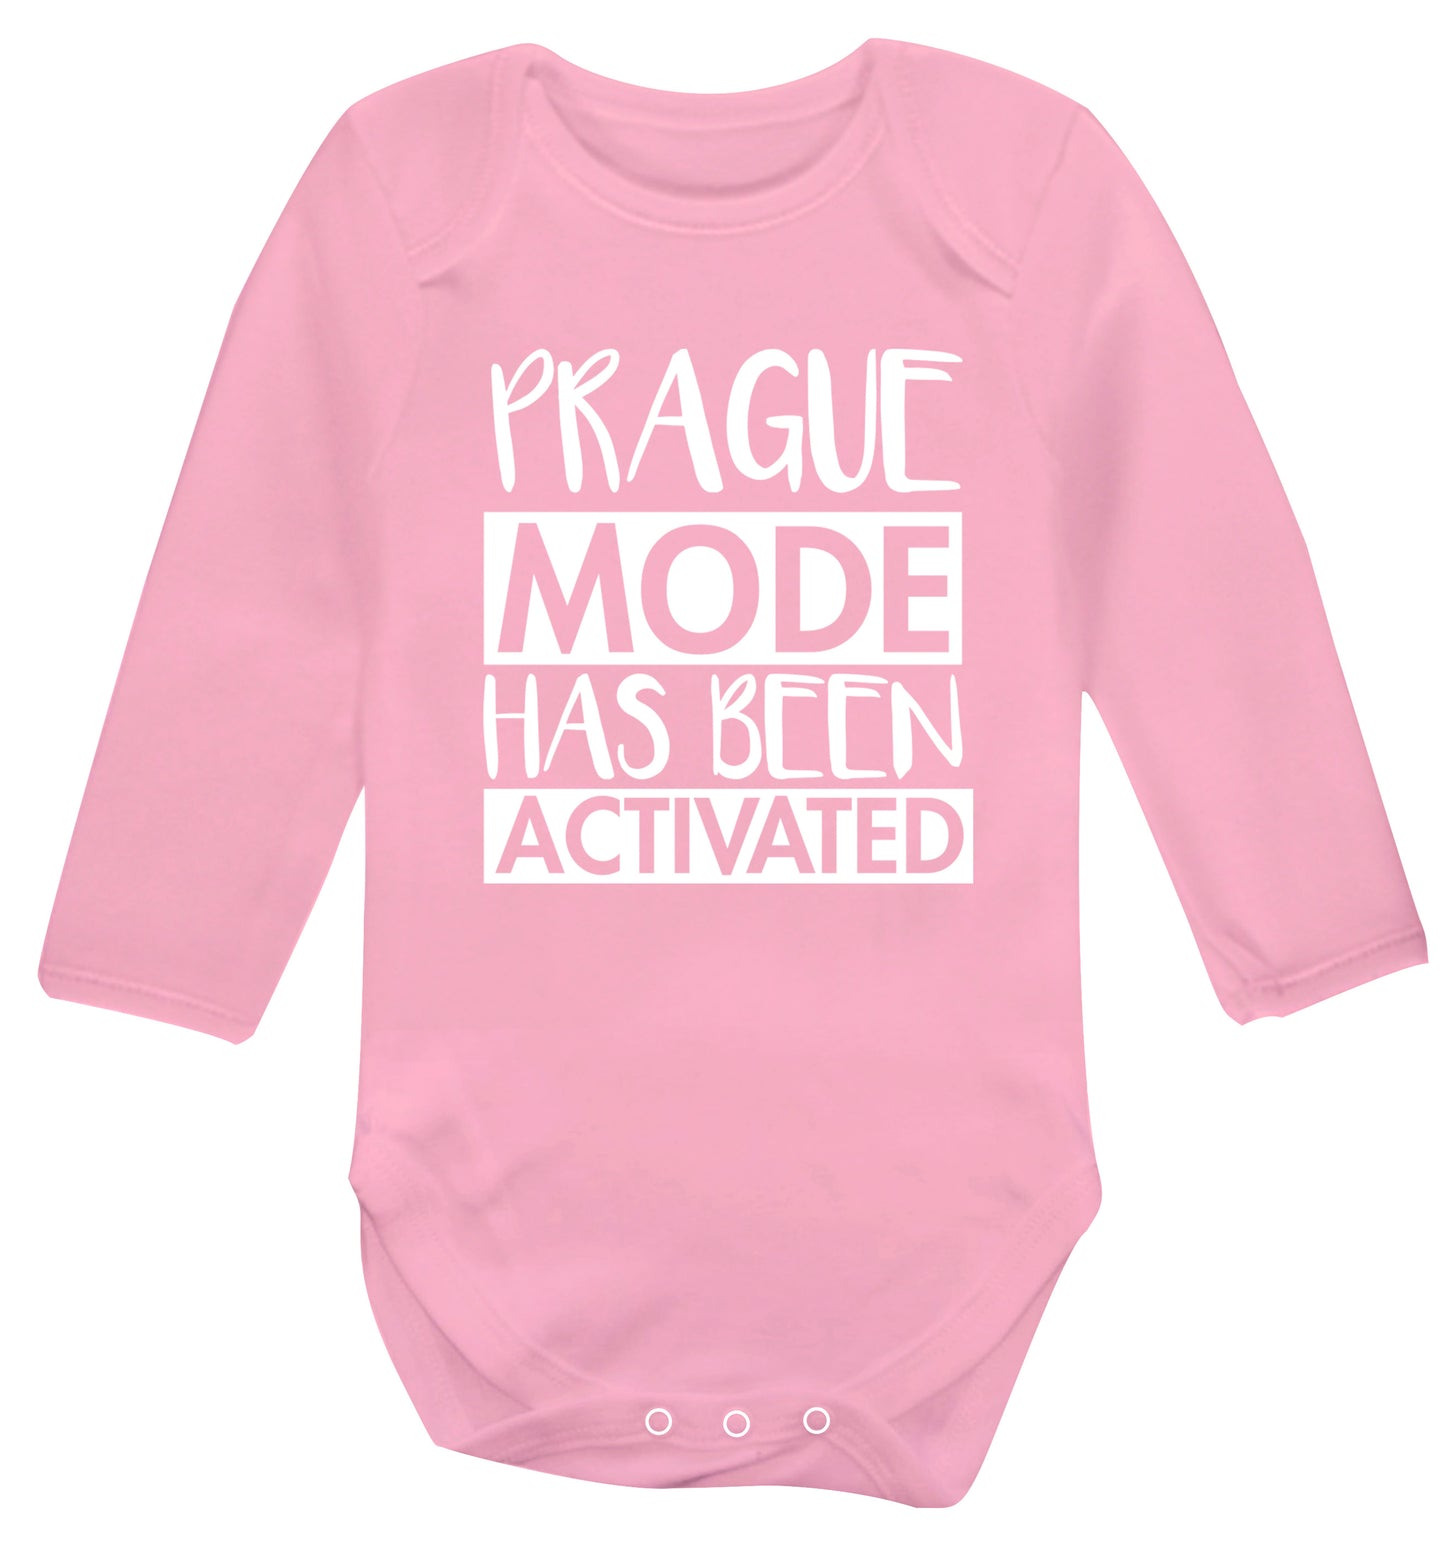 Prague mode has been activated Baby Vest long sleeved pale pink 6-12 months